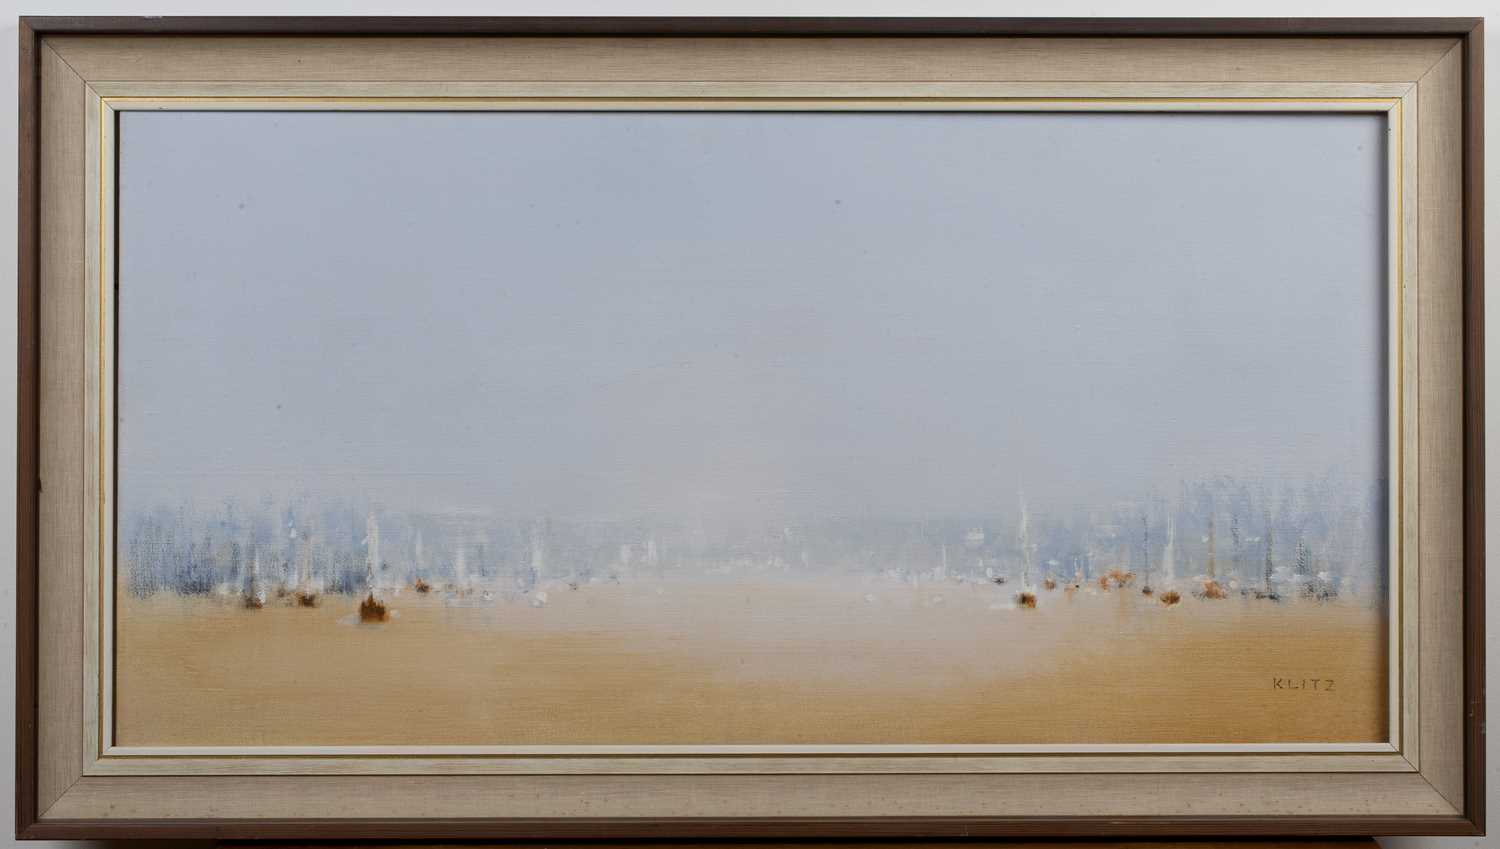 Anthony Robert Klitz (1917-2000) 'Yachting, Isle of Wight', oil on canvas, signed lower right, dated - Image 2 of 3